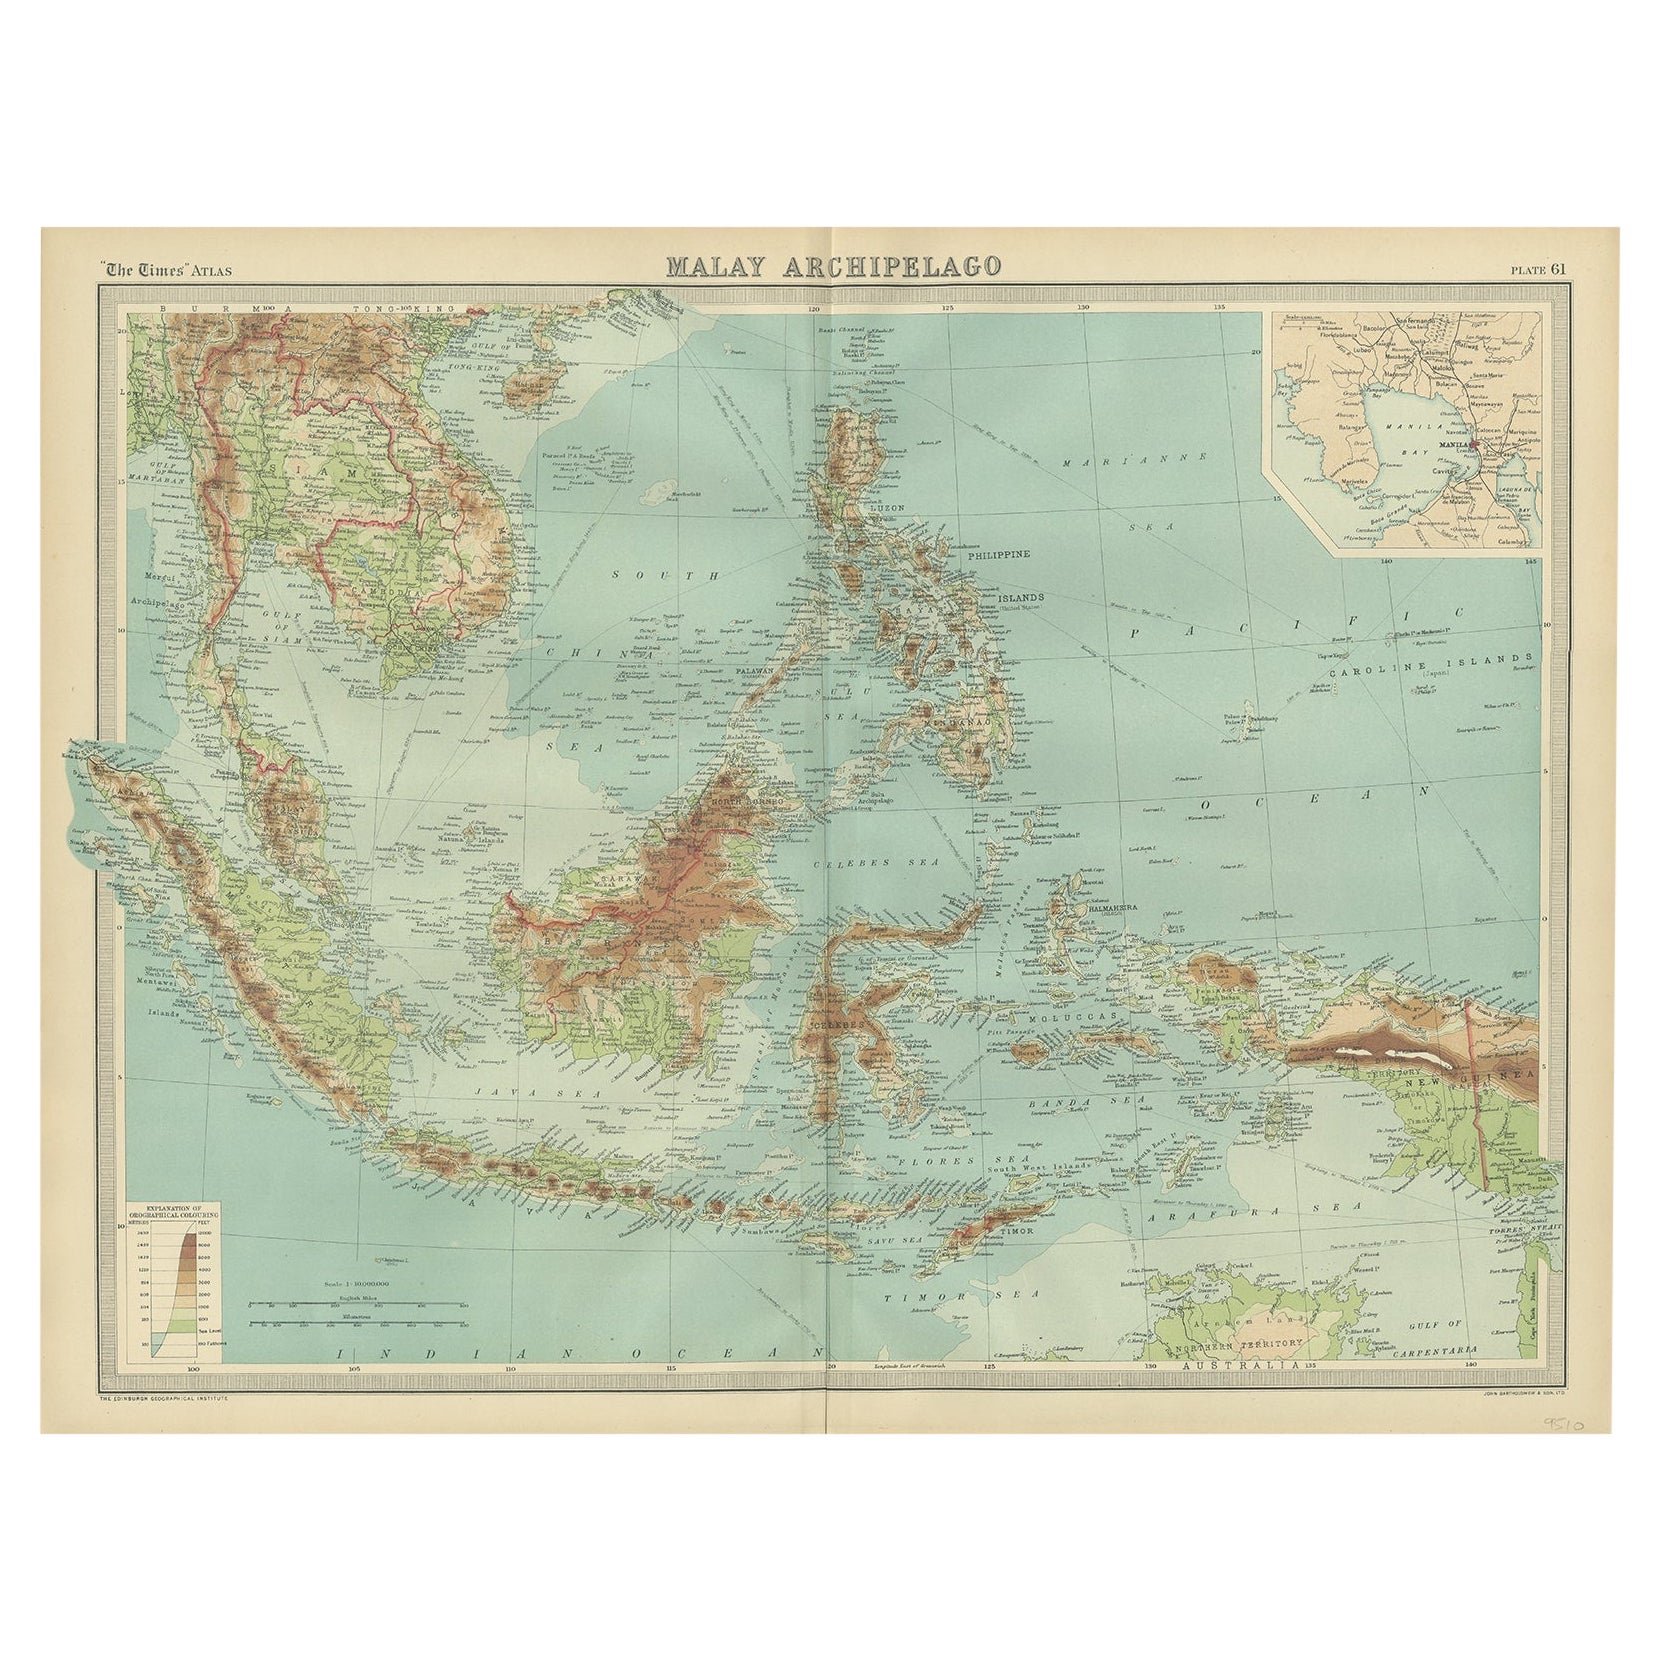 Old Map of South East Asia Showing the Malay Archipelago, incl Borneo etc, 1922